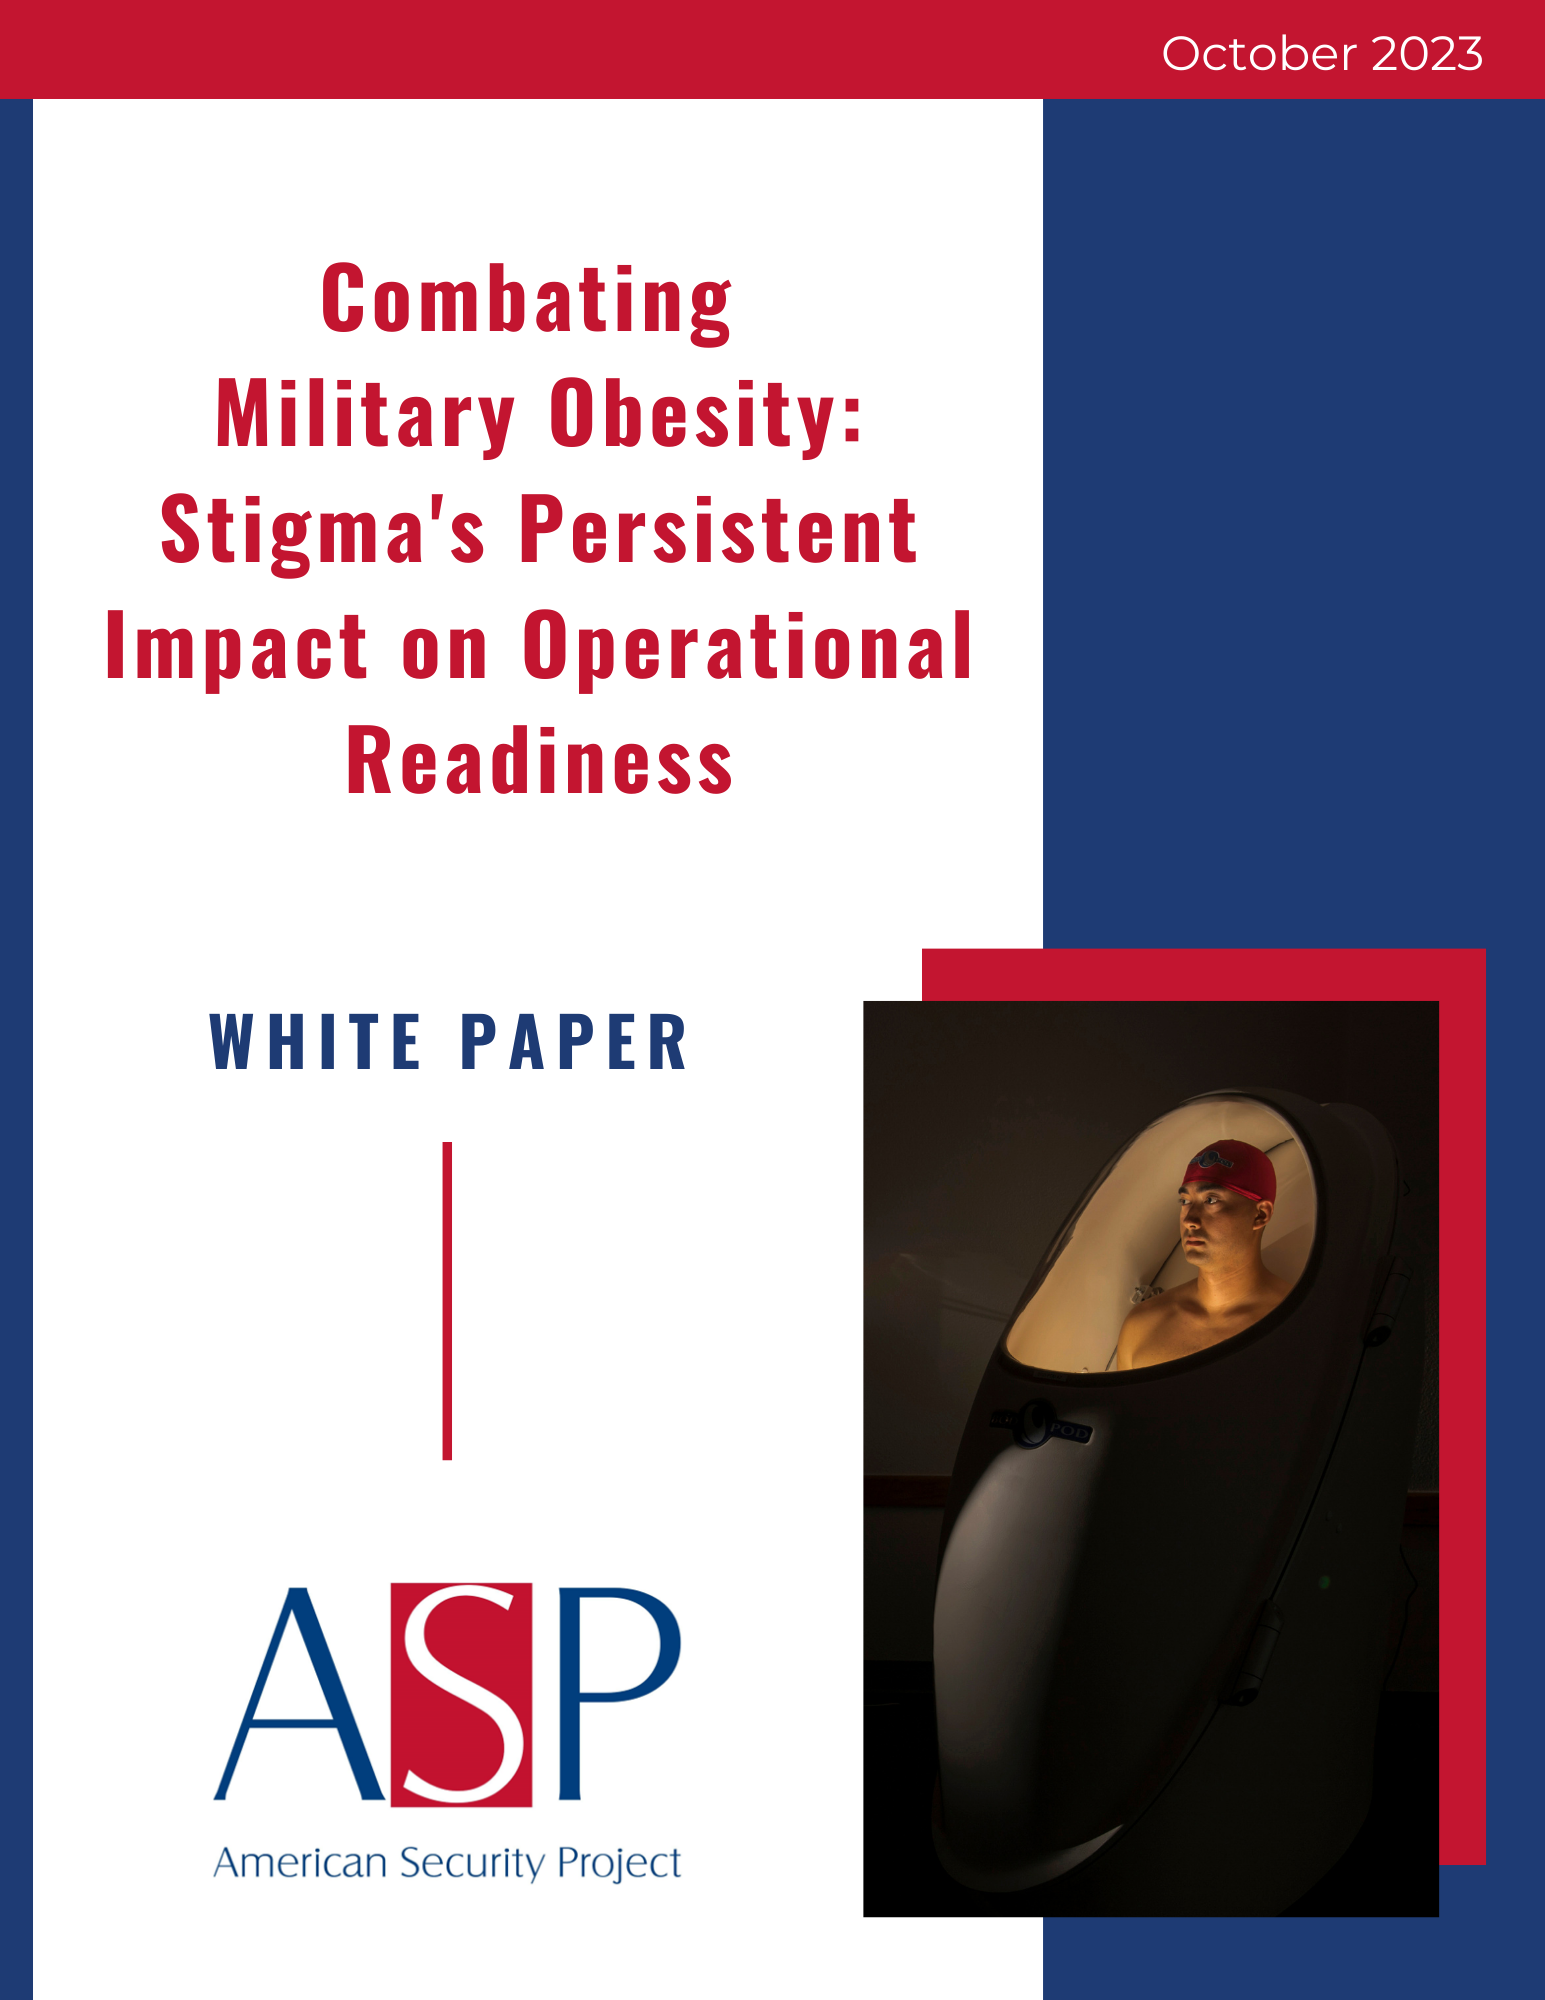 White Paper – Combating Military Obesity: Stigma’s Persistent Impact on Operational Readiness